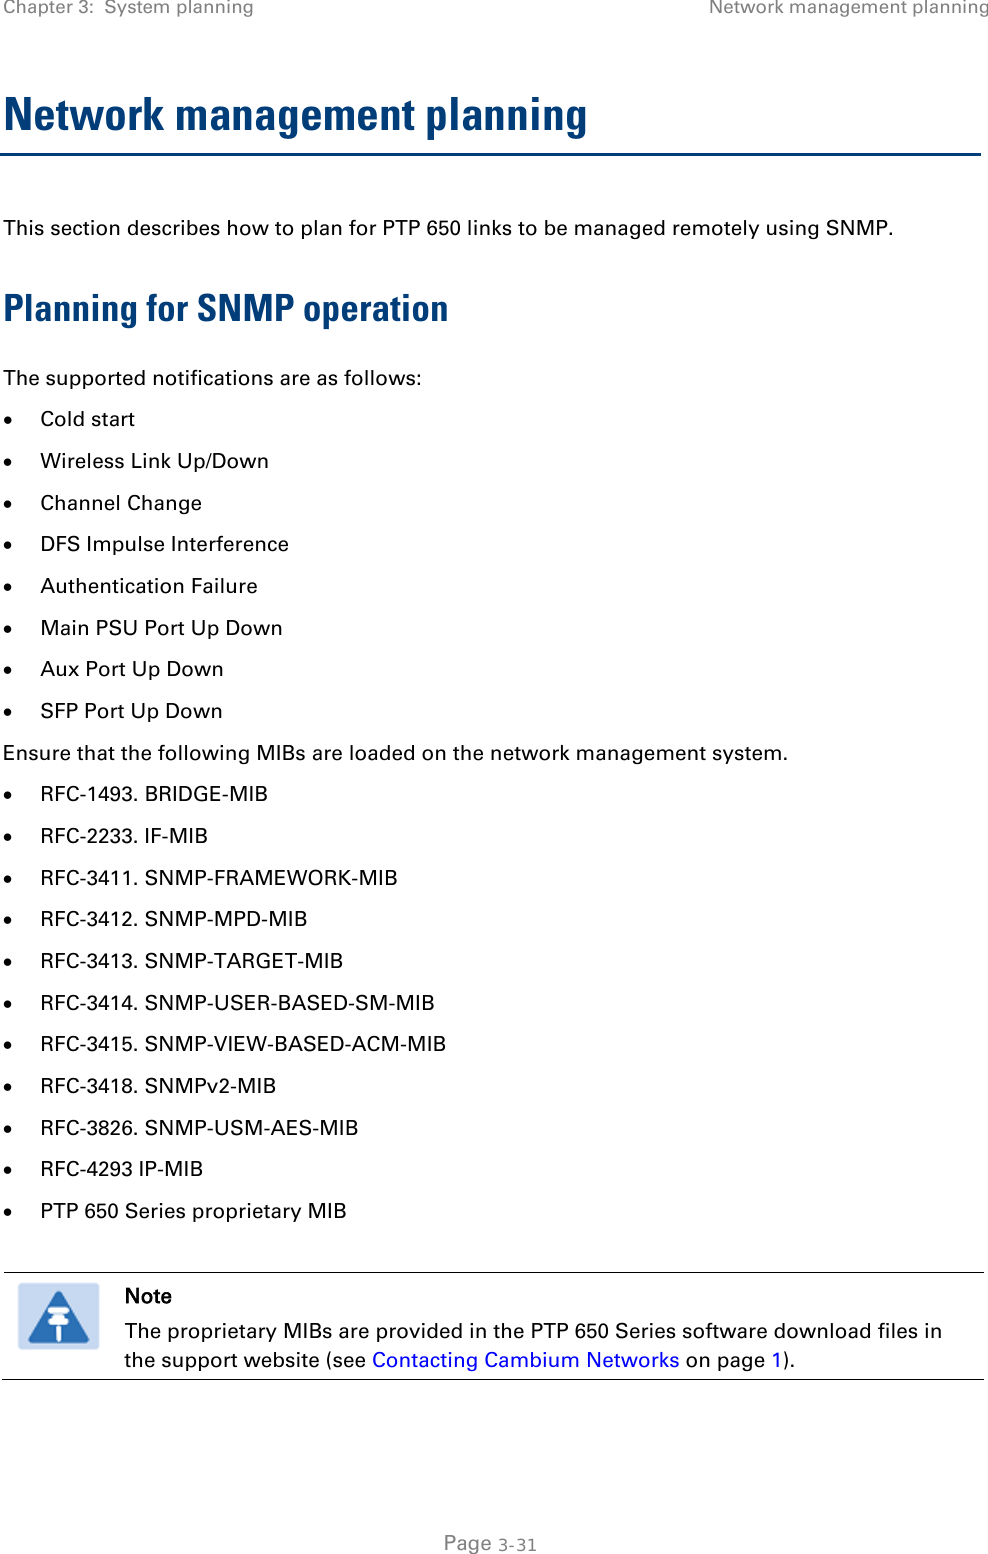 Chapter 3:  System planning Network management planning  Network management planning This section describes how to plan for PTP 650 links to be managed remotely using SNMP. Planning for SNMP operation The supported notifications are as follows: • Cold start • Wireless Link Up/Down • Channel Change • DFS Impulse Interference • Authentication Failure • Main PSU Port Up Down • Aux Port Up Down • SFP Port Up Down Ensure that the following MIBs are loaded on the network management system. • RFC-1493. BRIDGE-MIB • RFC-2233. IF-MIB • RFC-3411. SNMP-FRAMEWORK-MIB • RFC-3412. SNMP-MPD-MIB • RFC-3413. SNMP-TARGET-MIB • RFC-3414. SNMP-USER-BASED-SM-MIB • RFC-3415. SNMP-VIEW-BASED-ACM-MIB • RFC-3418. SNMPv2-MIB • RFC-3826. SNMP-USM-AES-MIB • RFC-4293 IP-MIB • PTP 650 Series proprietary MIB   Note The proprietary MIBs are provided in the PTP 650 Series software download files in the support website (see Contacting Cambium Networks on page 1).   Page 3-31 